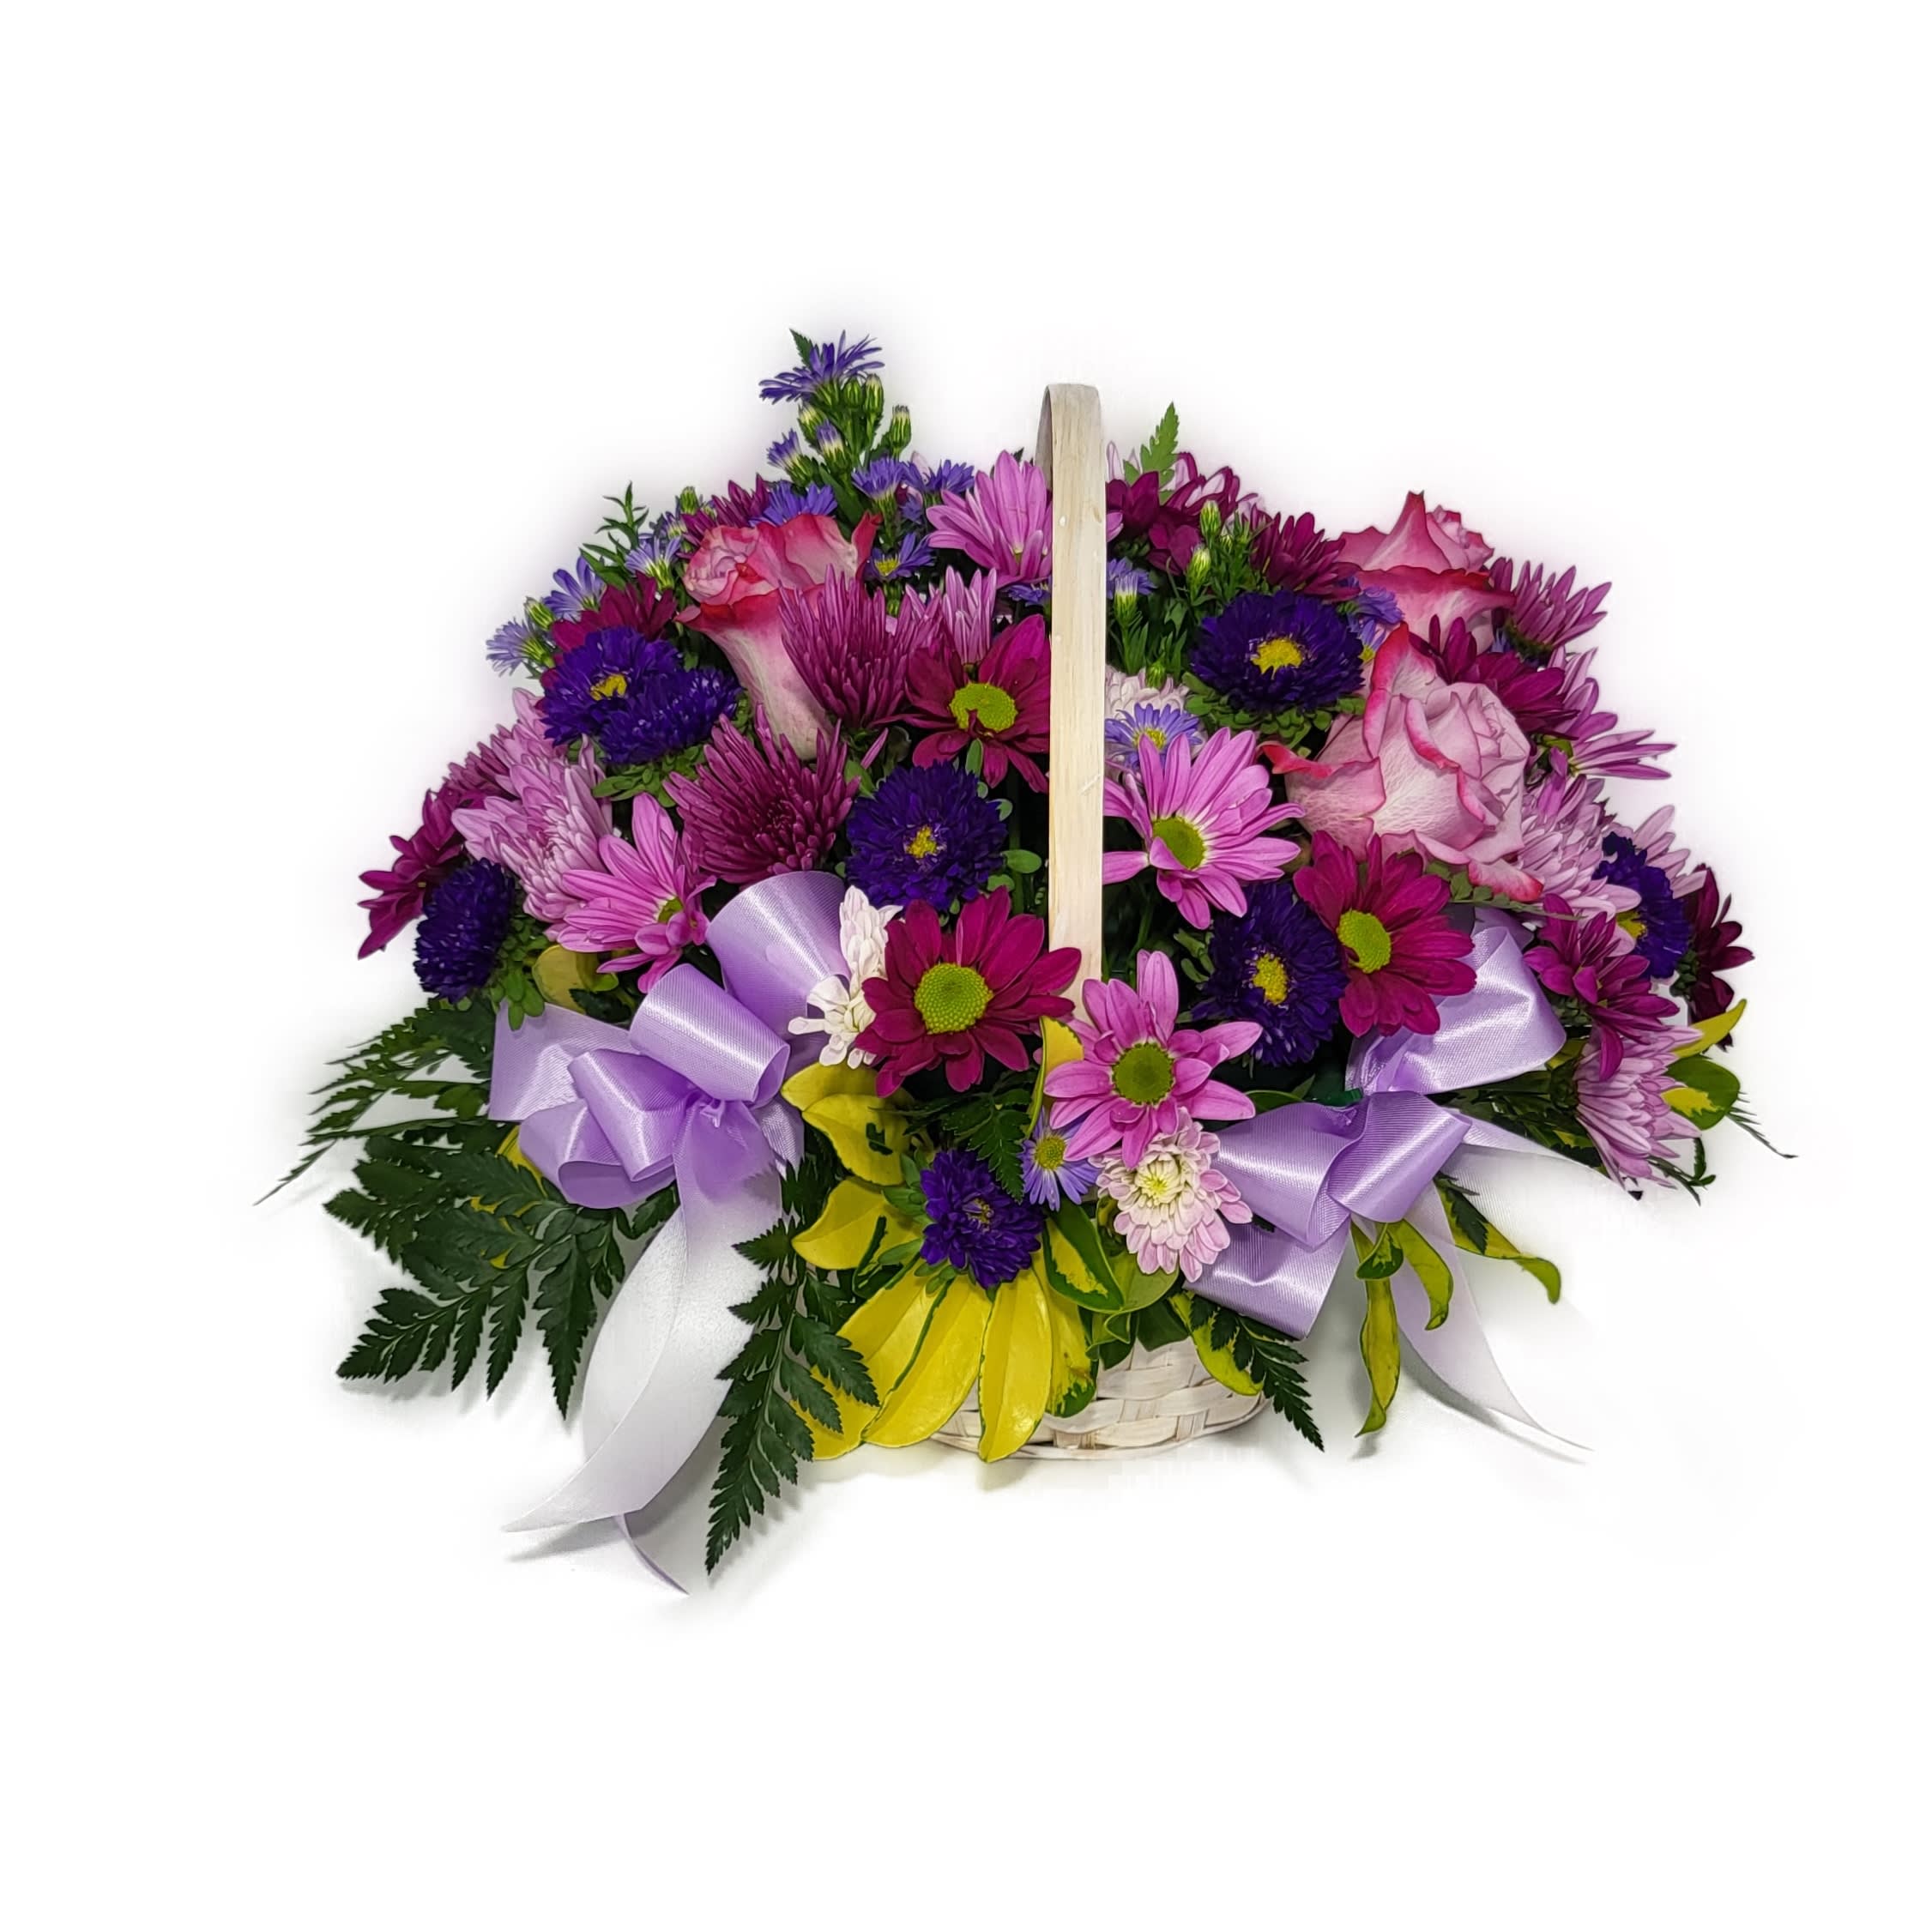 Daisy Dreams - This delightful array of floral favorites in a charming white bamboo basket accented with lavender ribbon. Surprise someone who could use a lift. It will make you both happy. With lavender daisy's,  purple matsumotos, lavender cushions and purple monte accented with fresh greenery. The flowers are delivered in a white bamboo basket accented with a lavender gingham ribbon. Approximately 12 1/2&quot; W x 10 1/2&quot; H